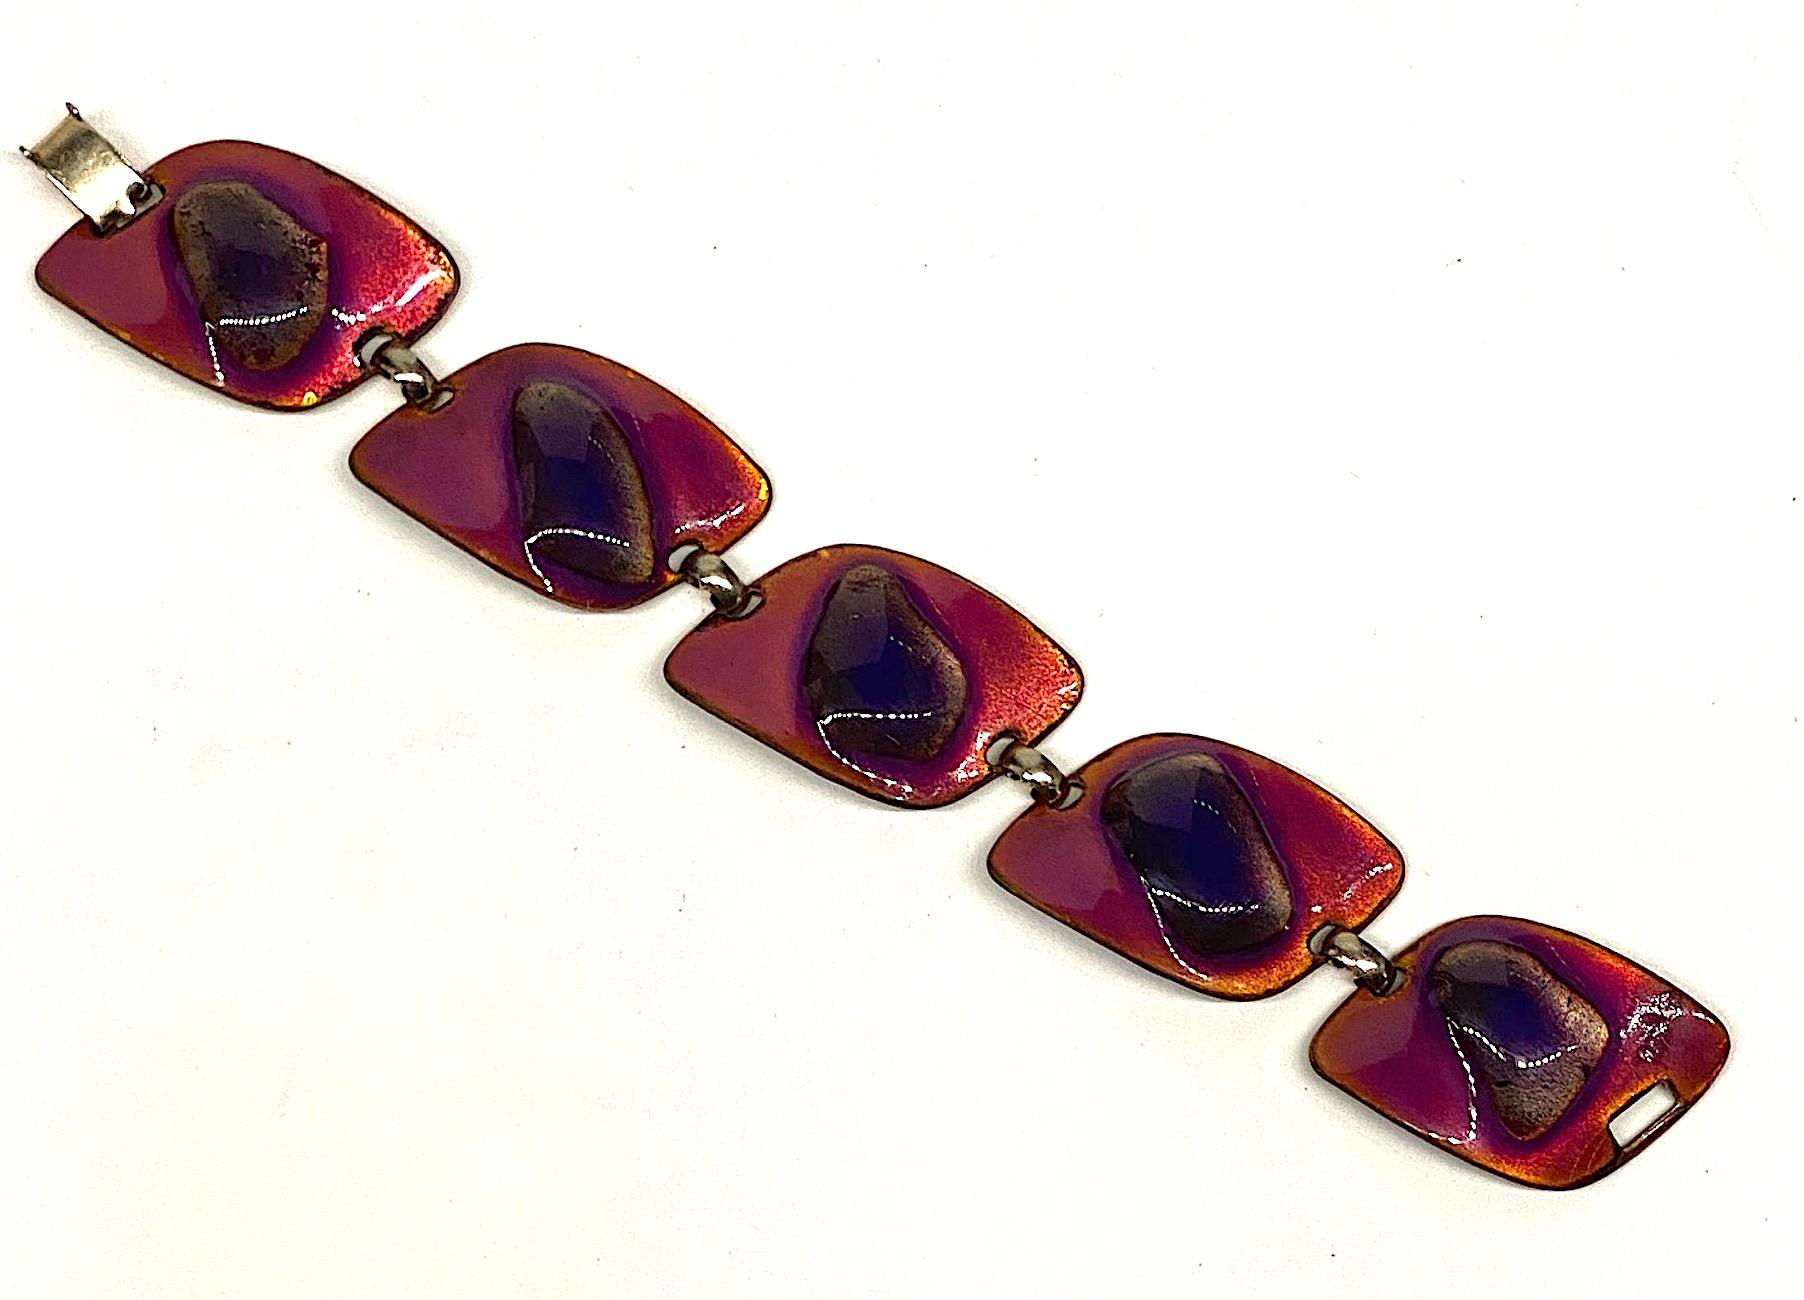 A lovely and colorful two tone purple enamel bracelet from the 1960s by Kay Denning. The bracelet is made up of five asymmetrical links and measures 1 inch wide and 7.5 inches long. The enameling involves the use of heating the dark purple glass